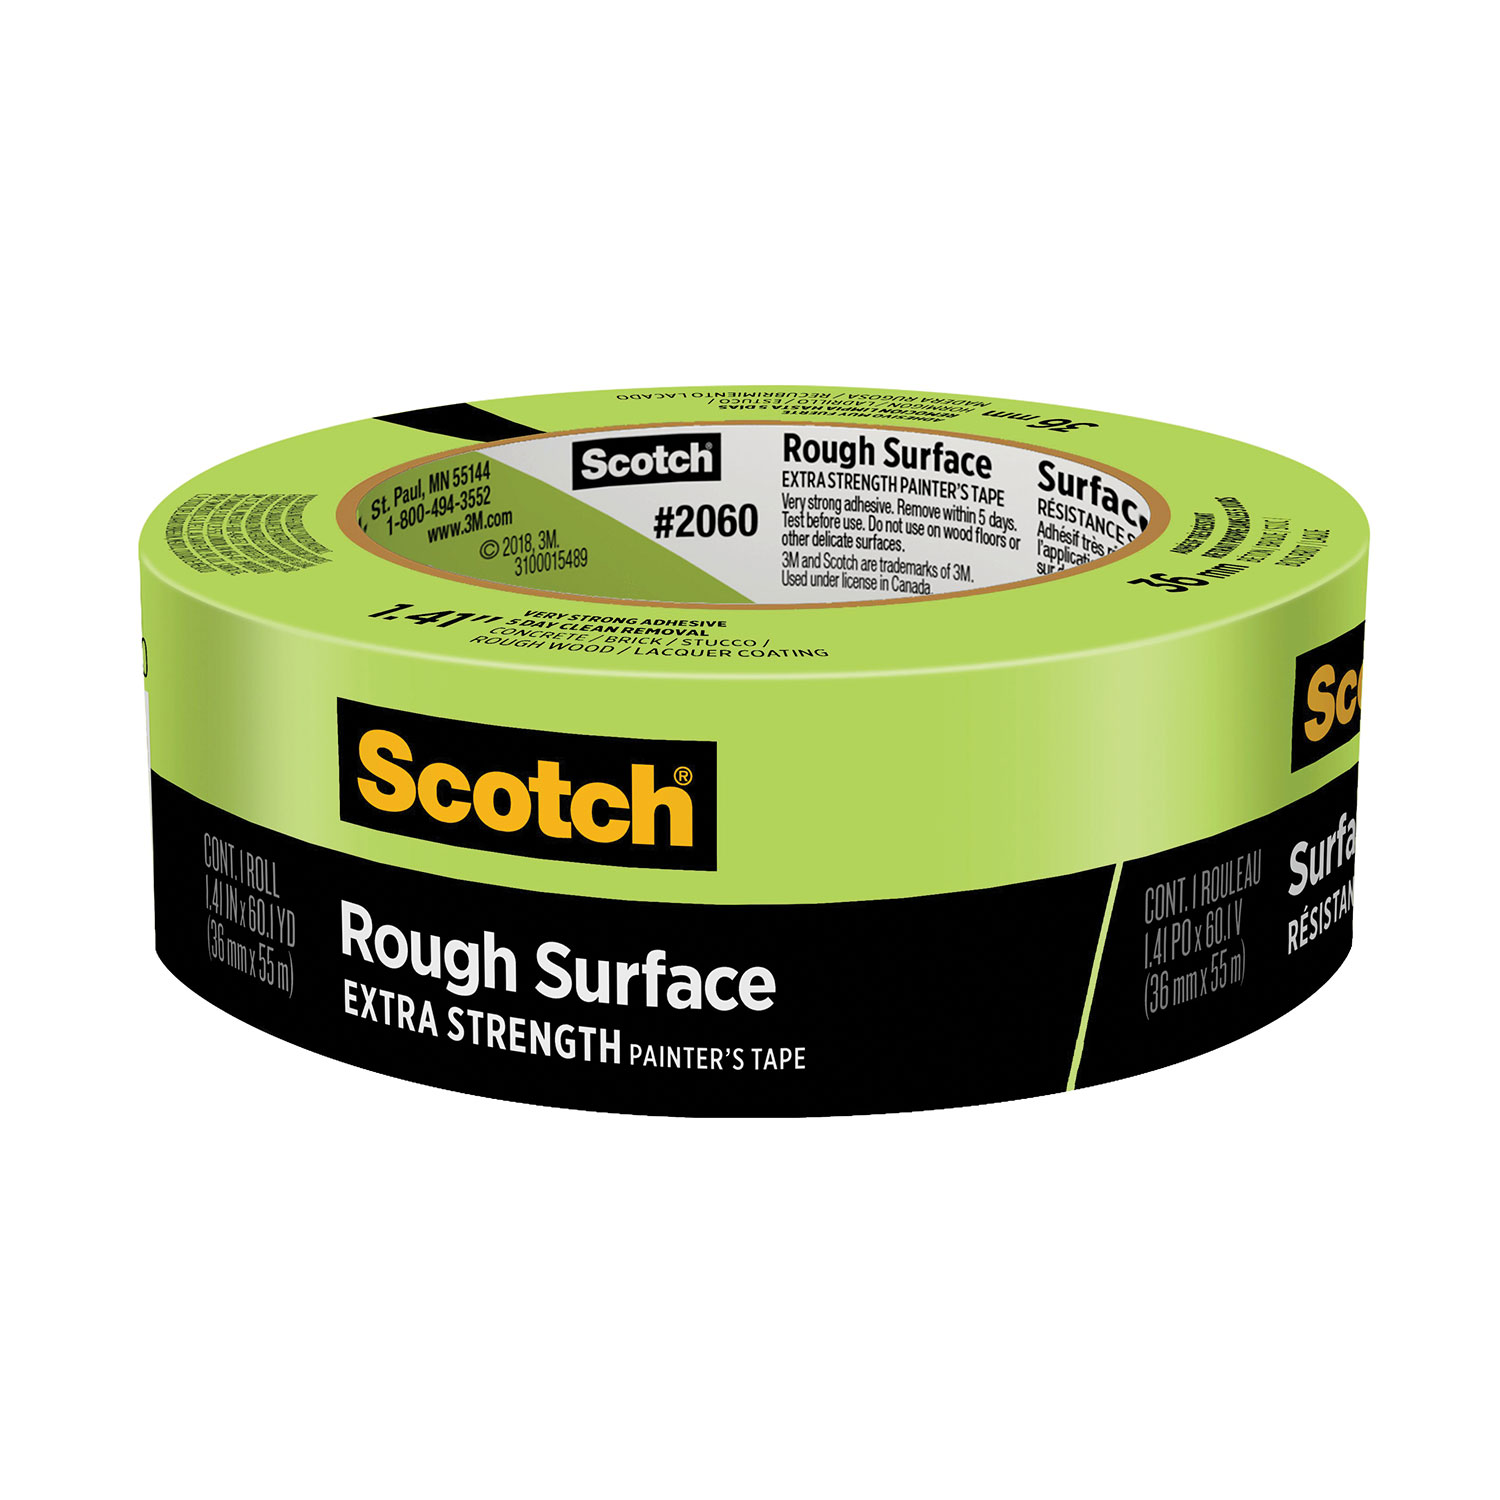 Scotch® Rough Surface Extra Strength Painters Tape, 3 Core, 1.41 x 60.1 yds, Green